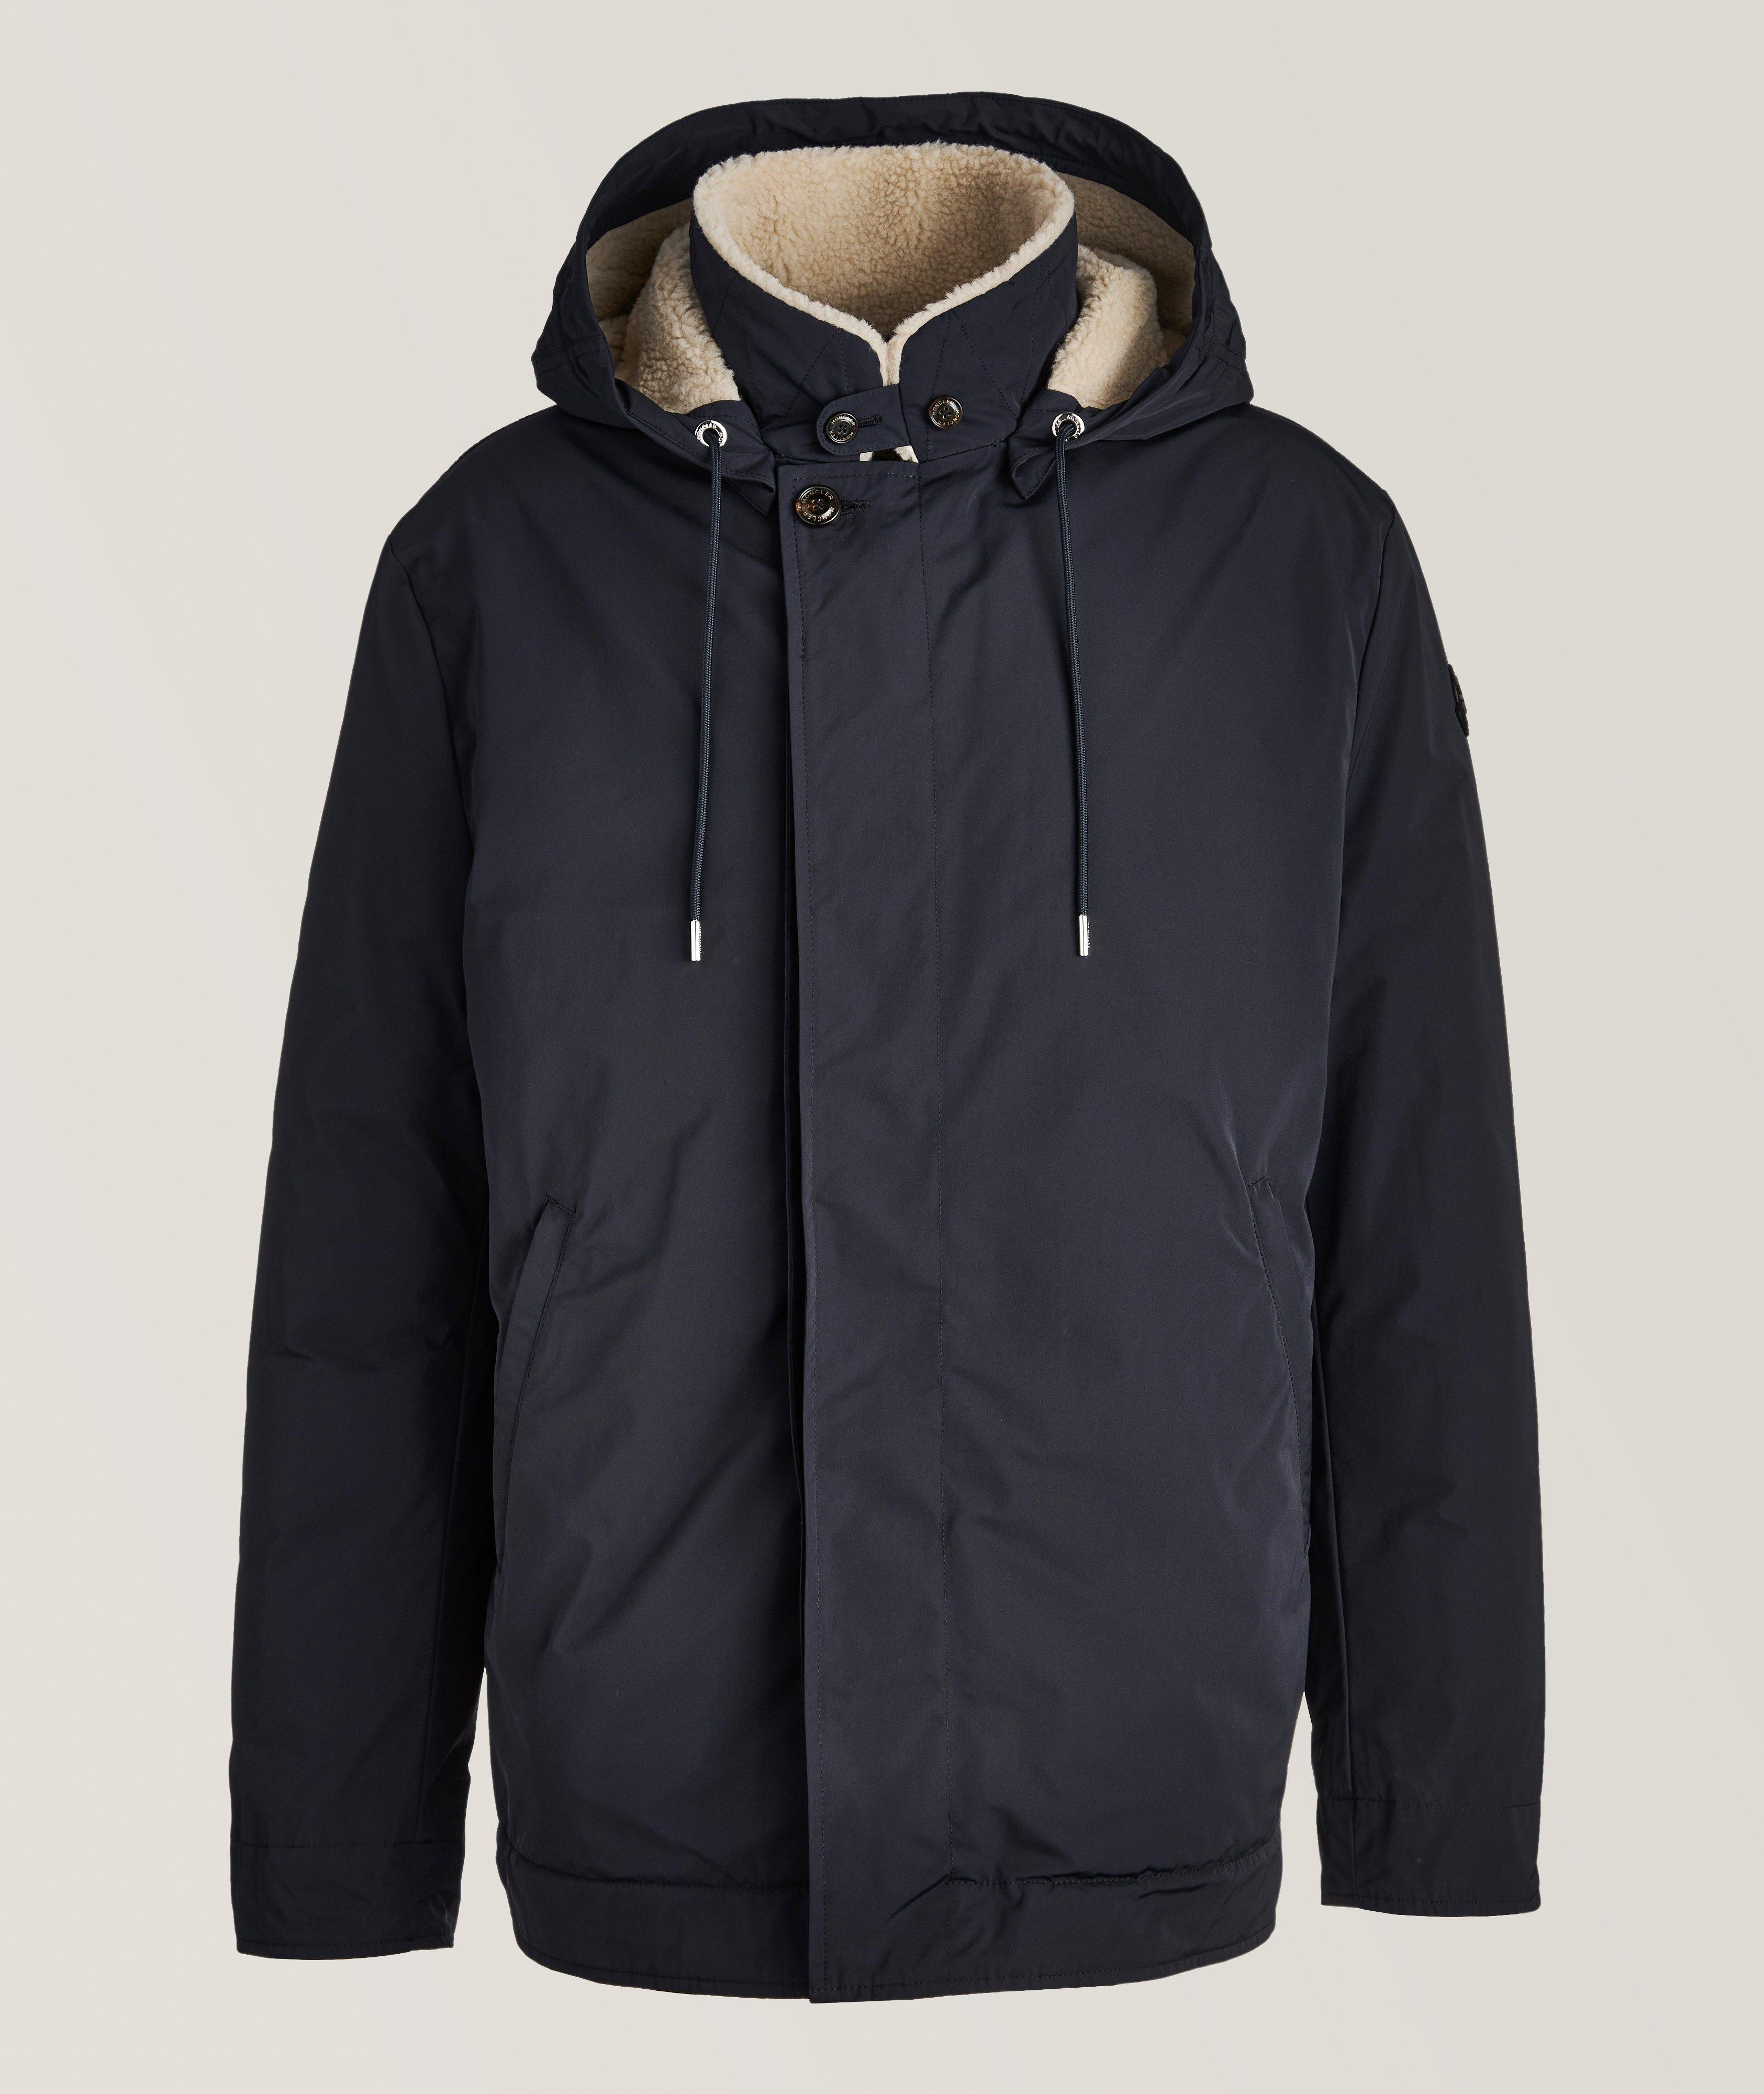 Theolier Sherpa Down Jacket image 0